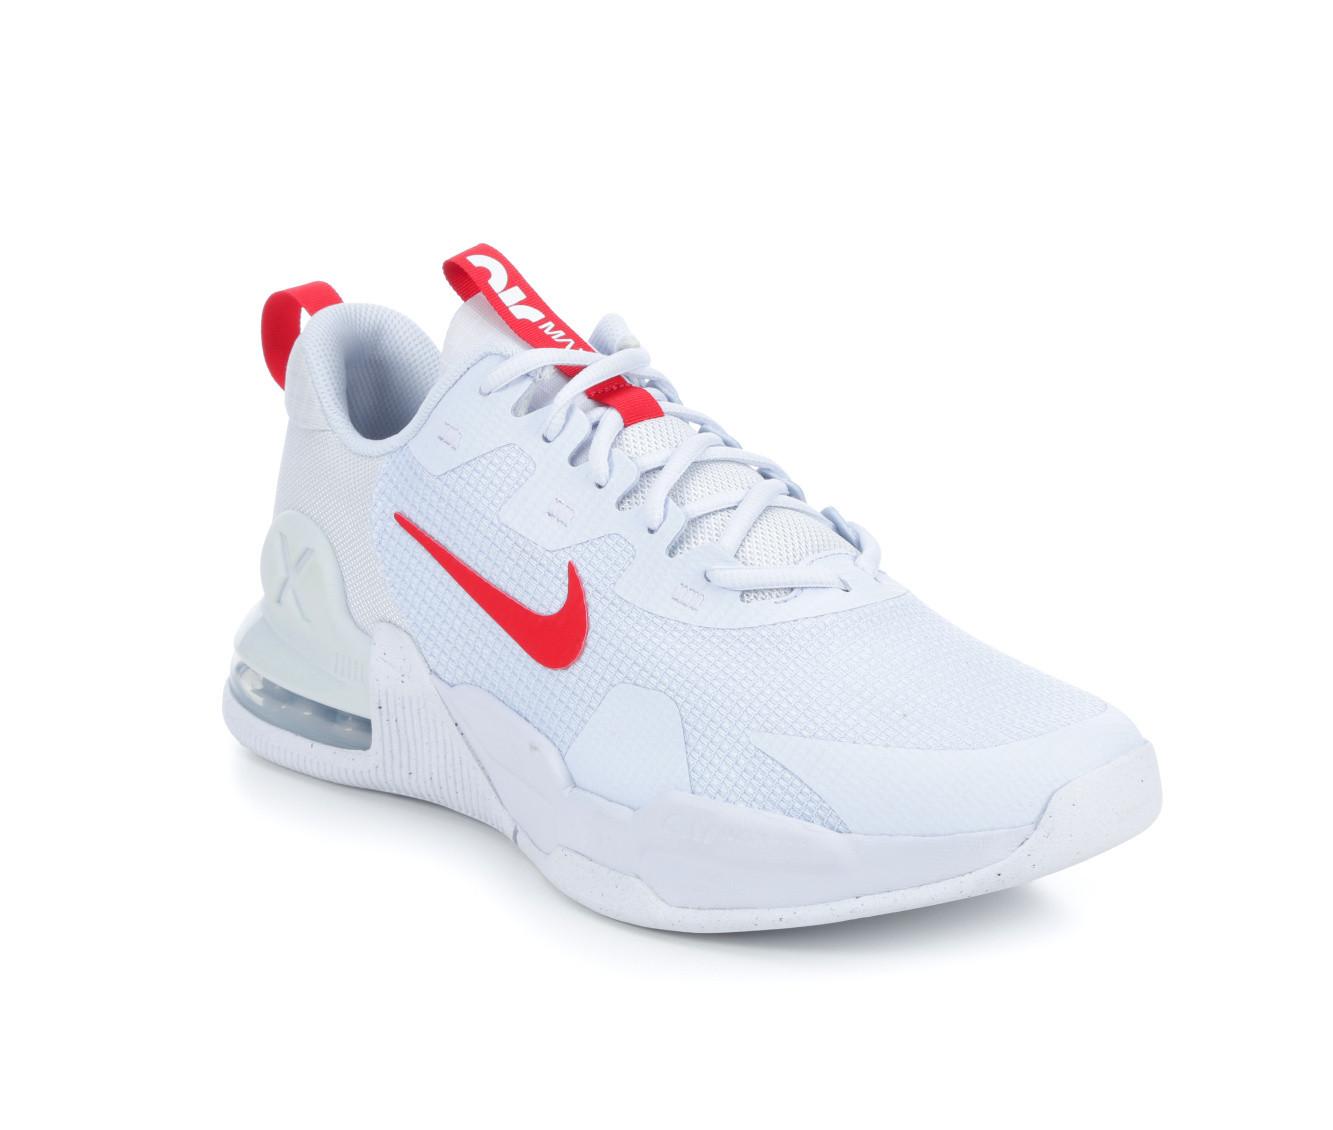 Men's Nike Air Max Alpha Trainer 5 Training Shoes